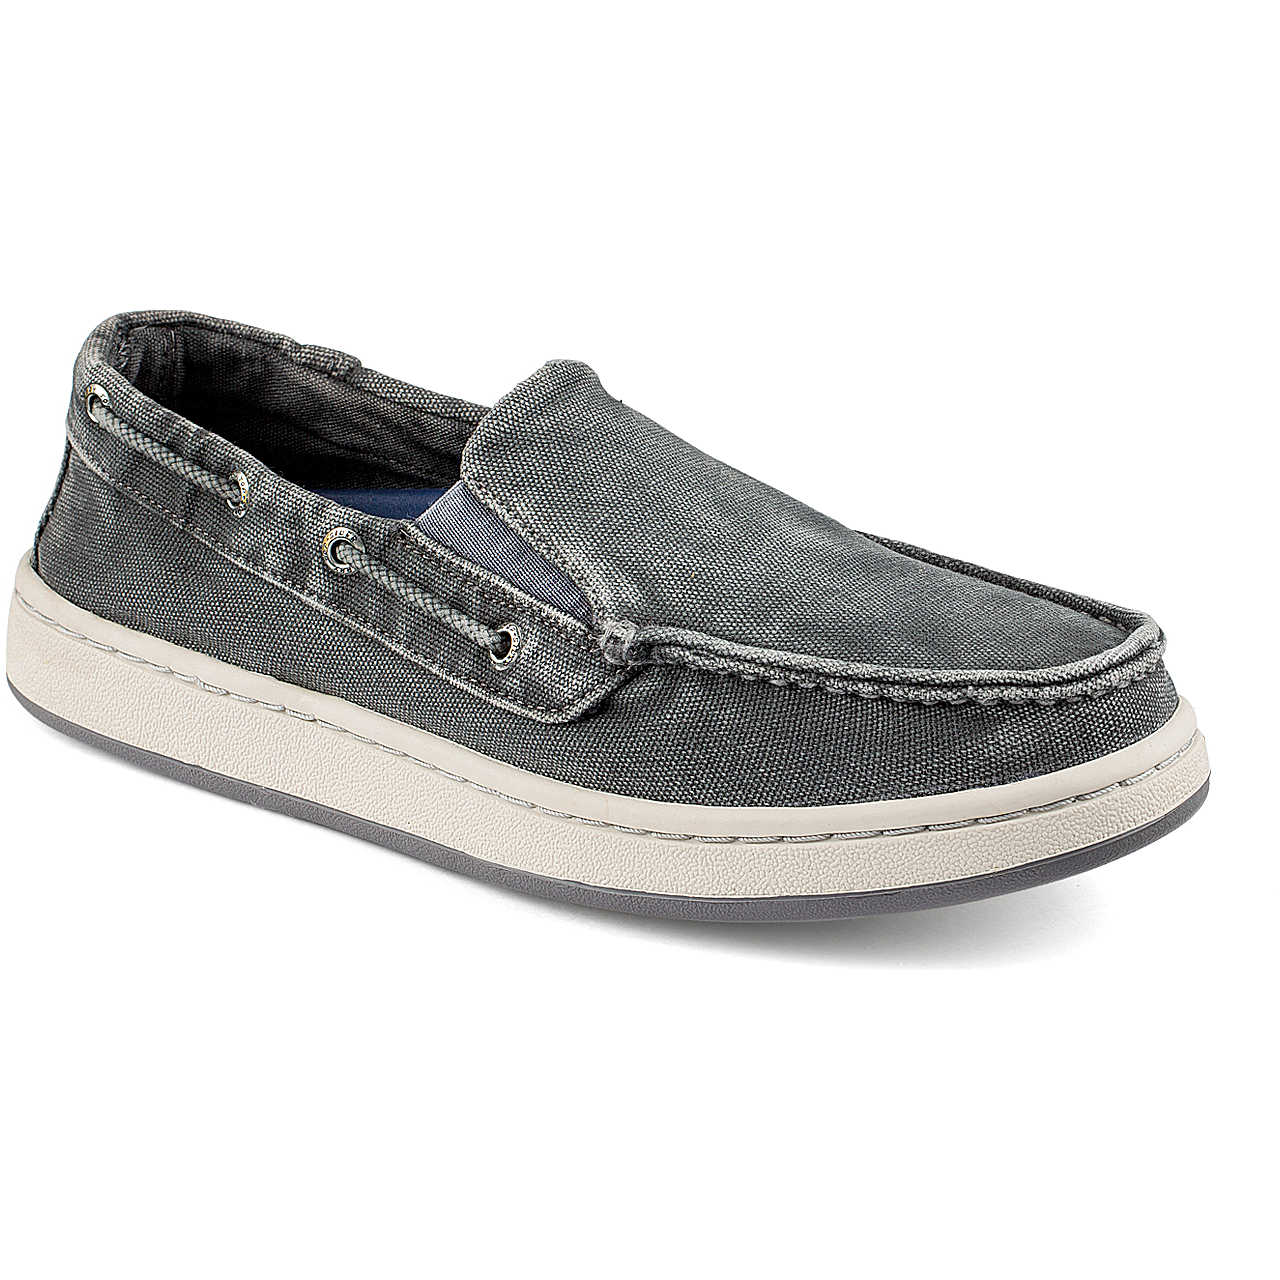 Men's Sperry Cup Canvas Slip-On Boat Shoe - Sperry